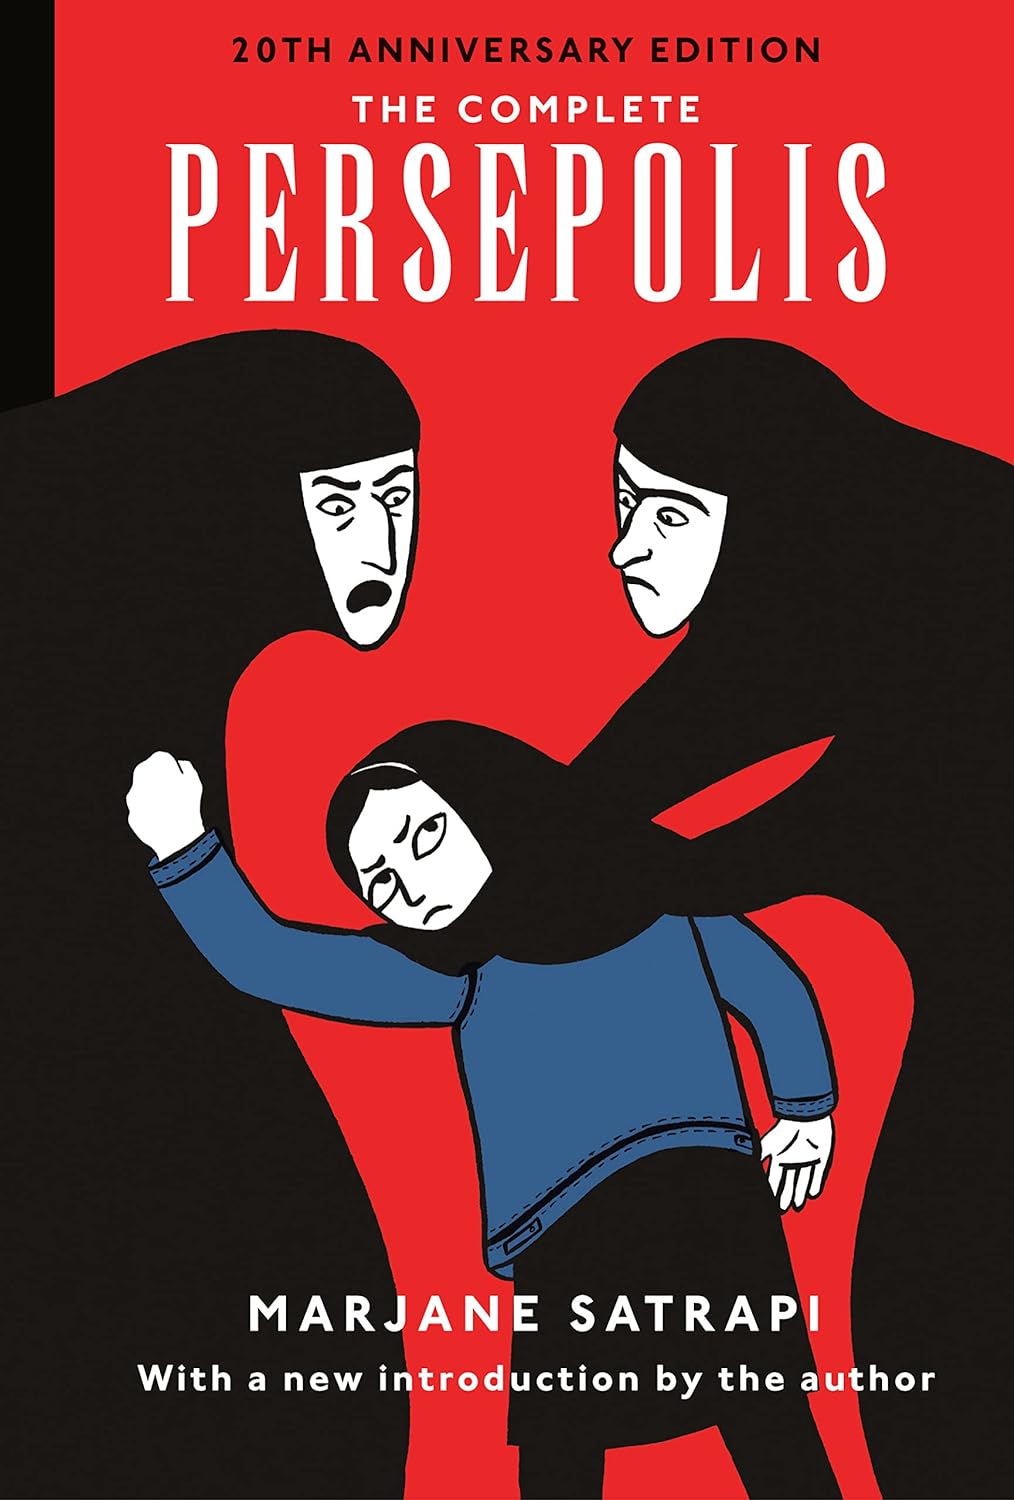 The Complete Persepolis // 20th Anniversary Edition